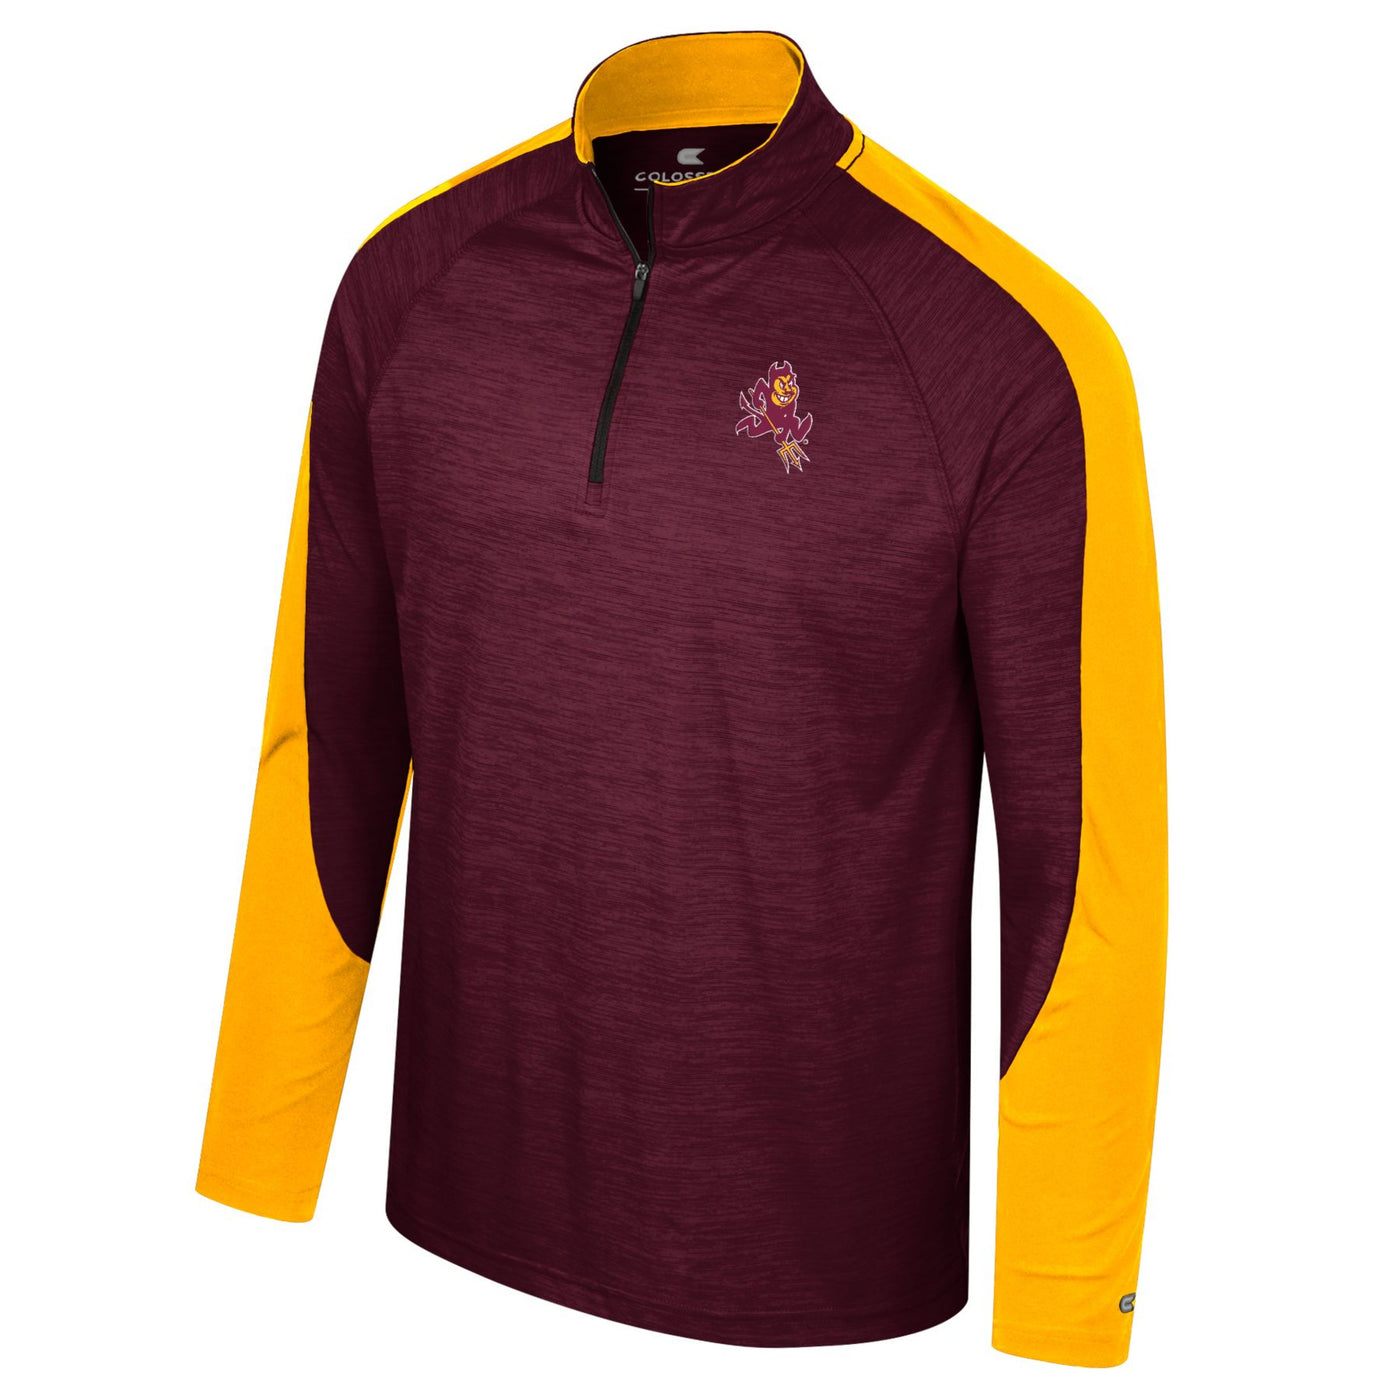 ASU maroon 1/4 zip long sleeve. there is a large portion. of the sleeve that is gold that follows all the way to the neckline. There is a small sparky mascot on the chest.